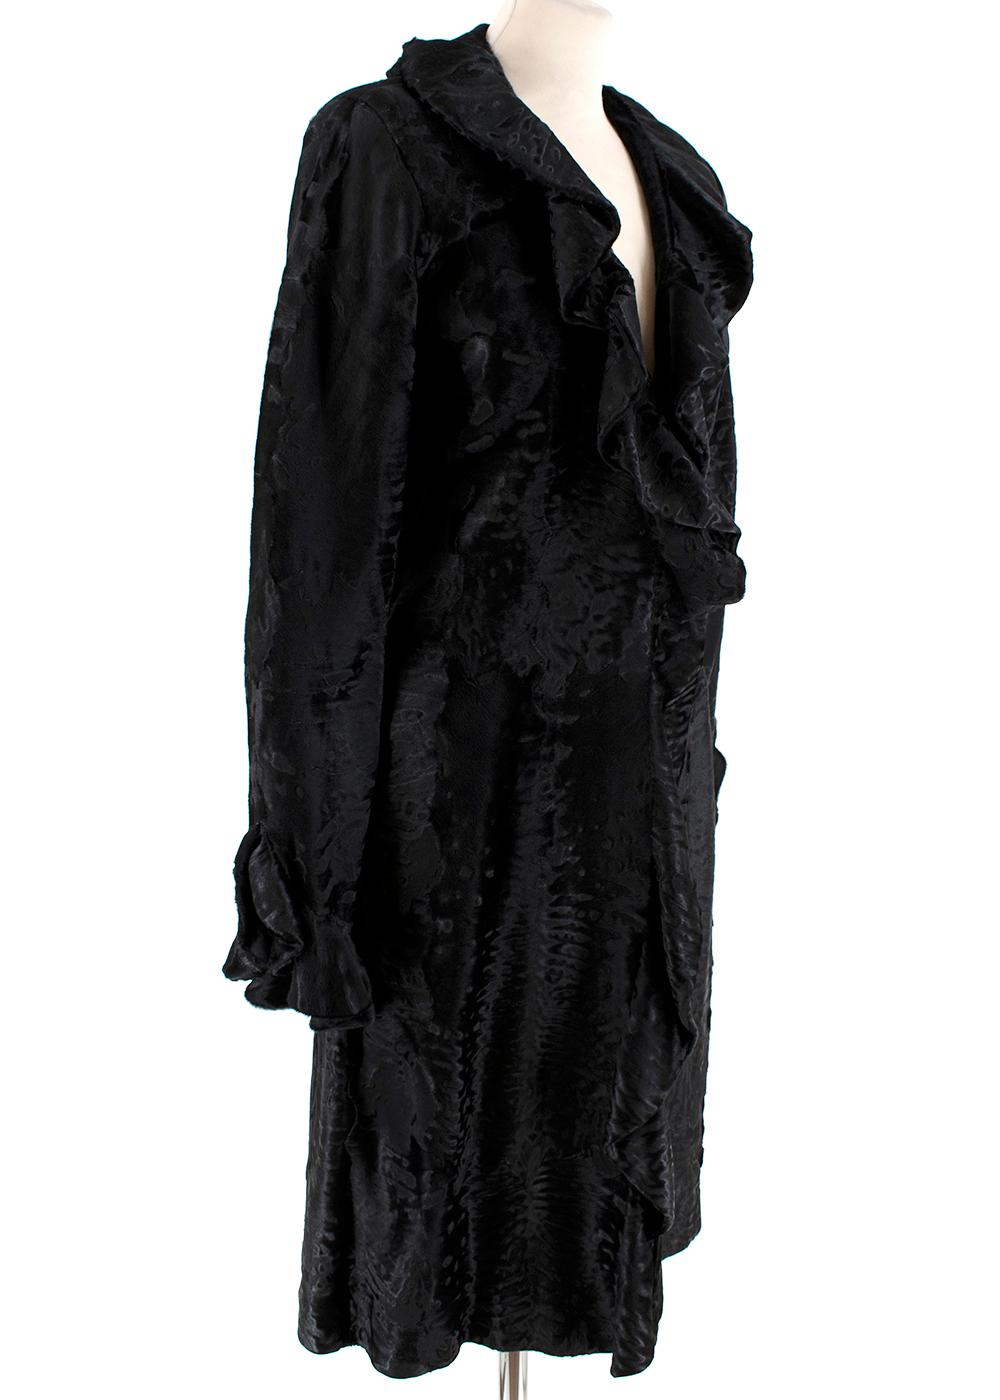 Valentino Black Astrakhan Ruffled Silk Lined Coat

- Longline style 
- Eyelet fastening 
- Astrakhan 
- Ruffled lapels and sleeves
-Fully Lined in silk

Materials 
THERE IS A MISSING CARE LABEL AND SIZE LABEL, HOWEVER BASED ON THE VIP SELLER'S USUAL